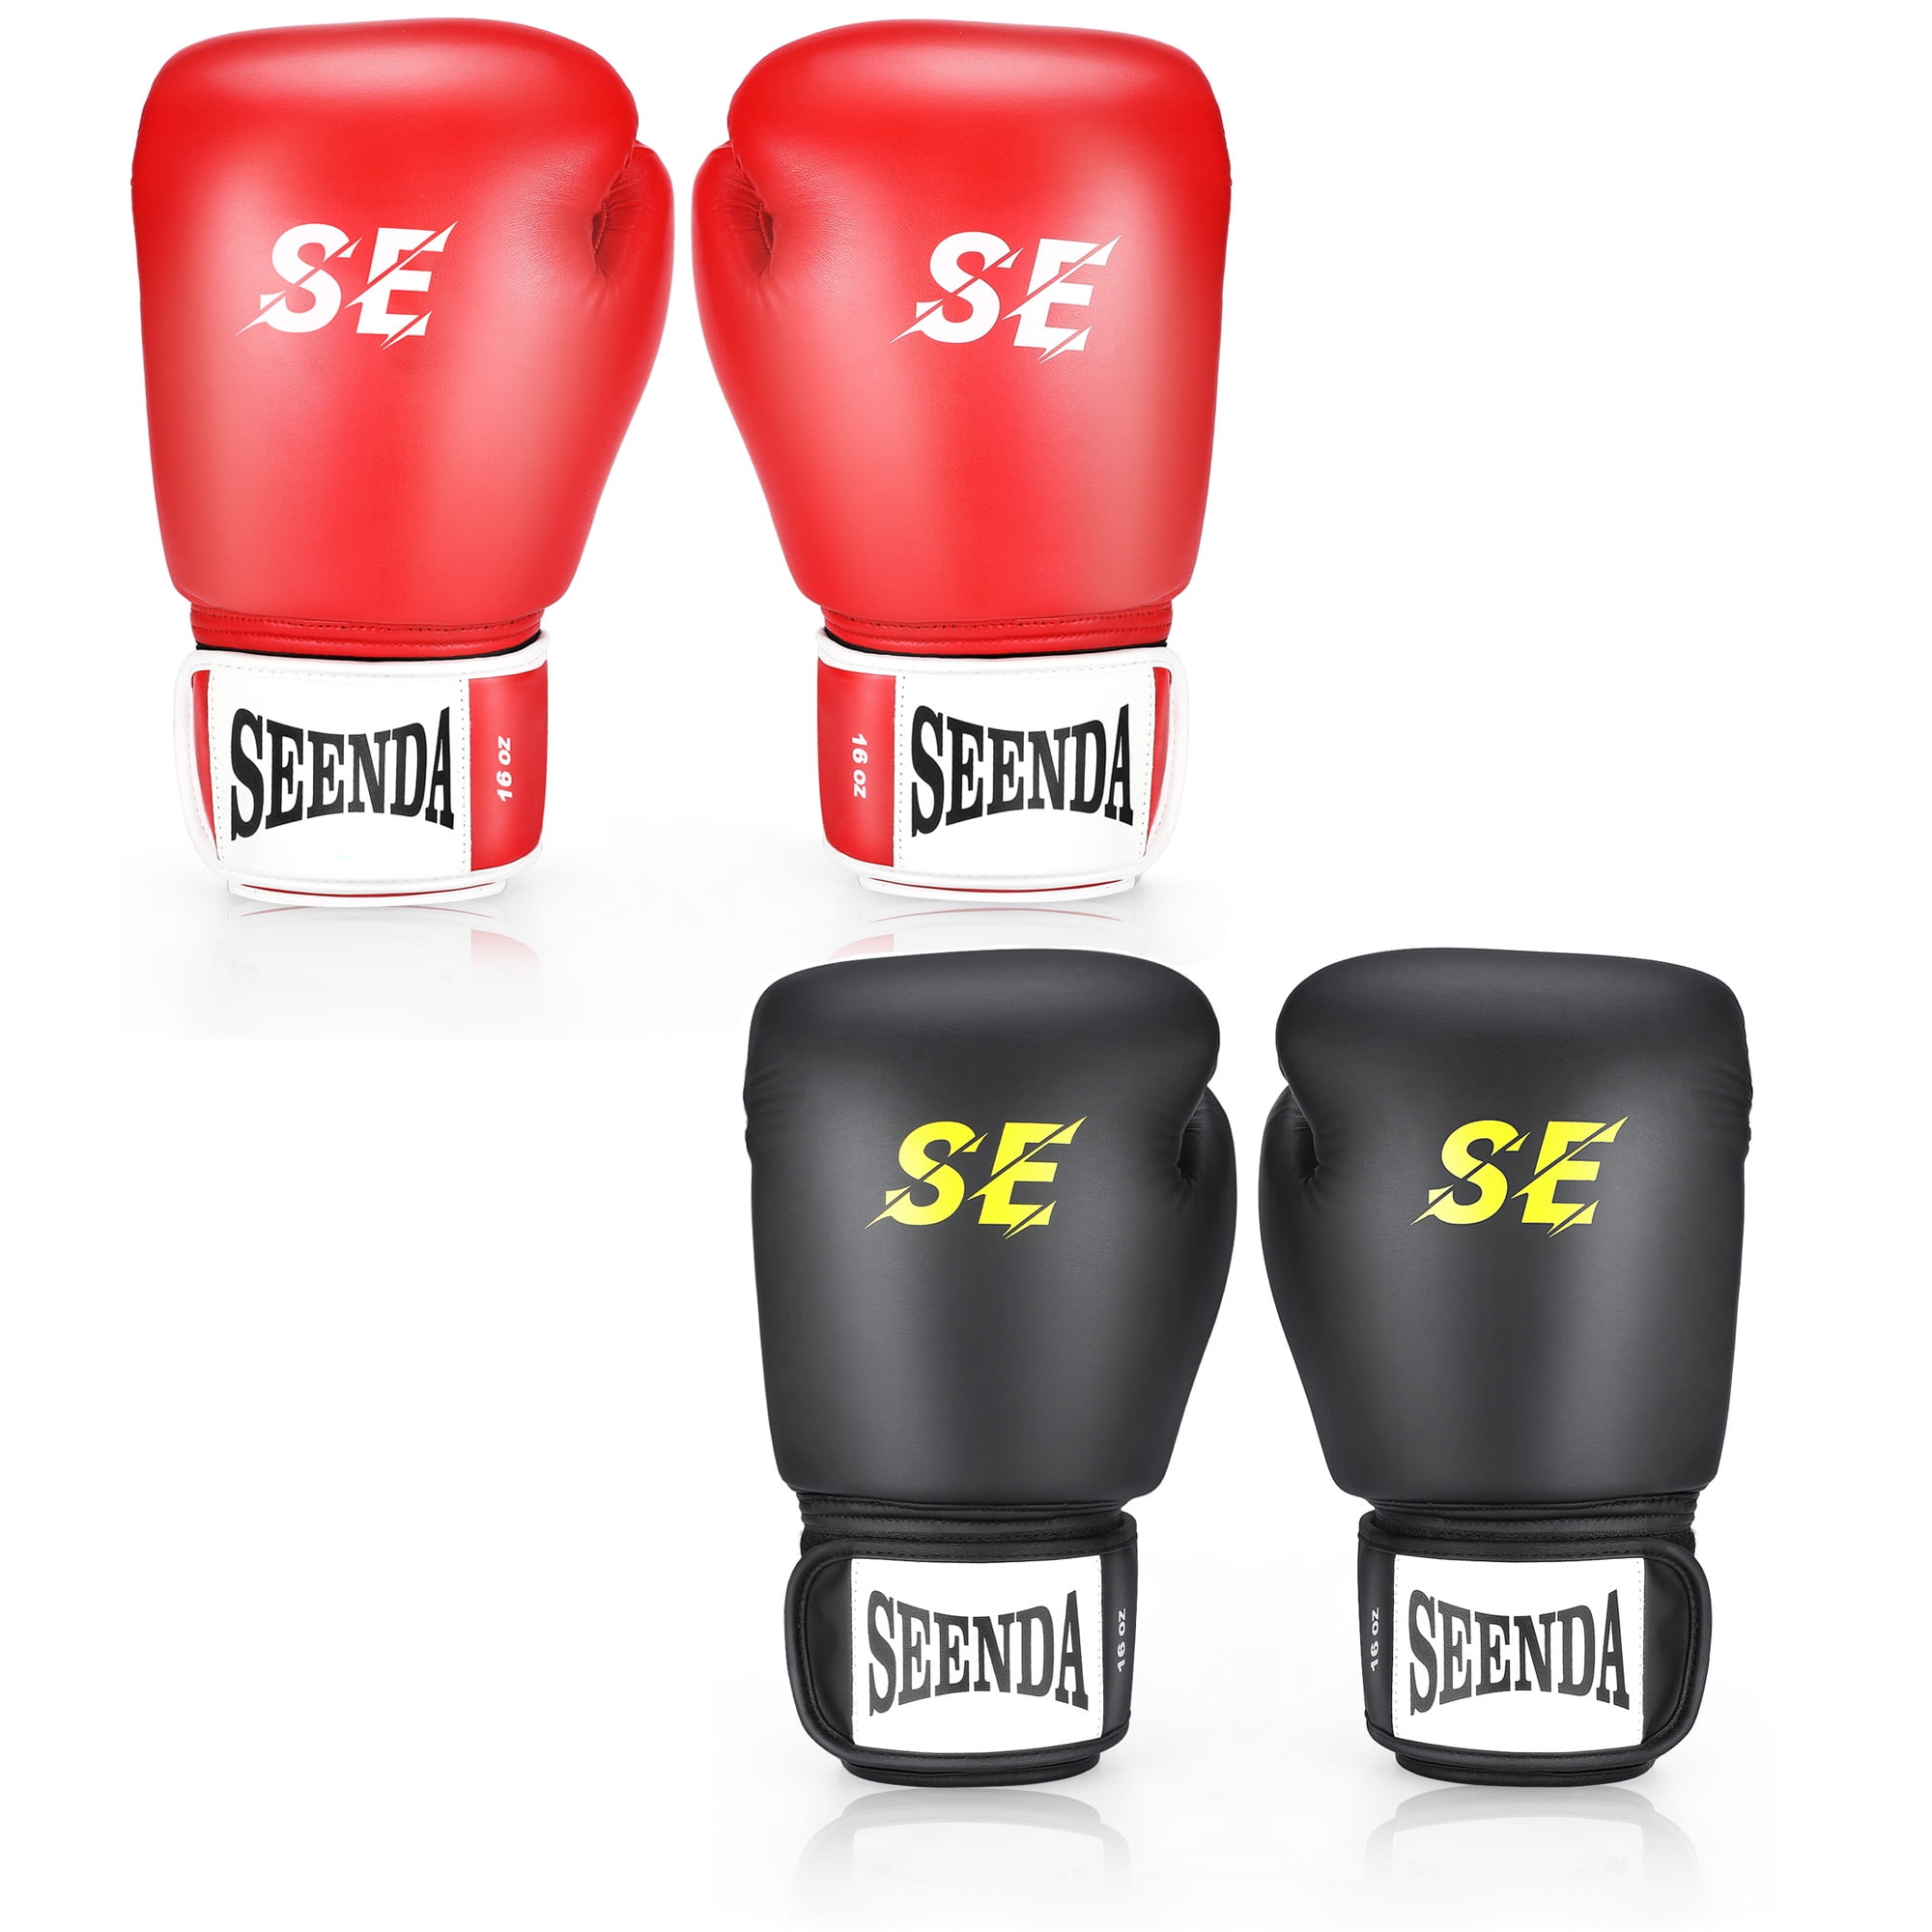 NEW Pro Style Elite Heavy Bag Training Boxing Gloves Fight Punch Mitts GEL SHOCK 